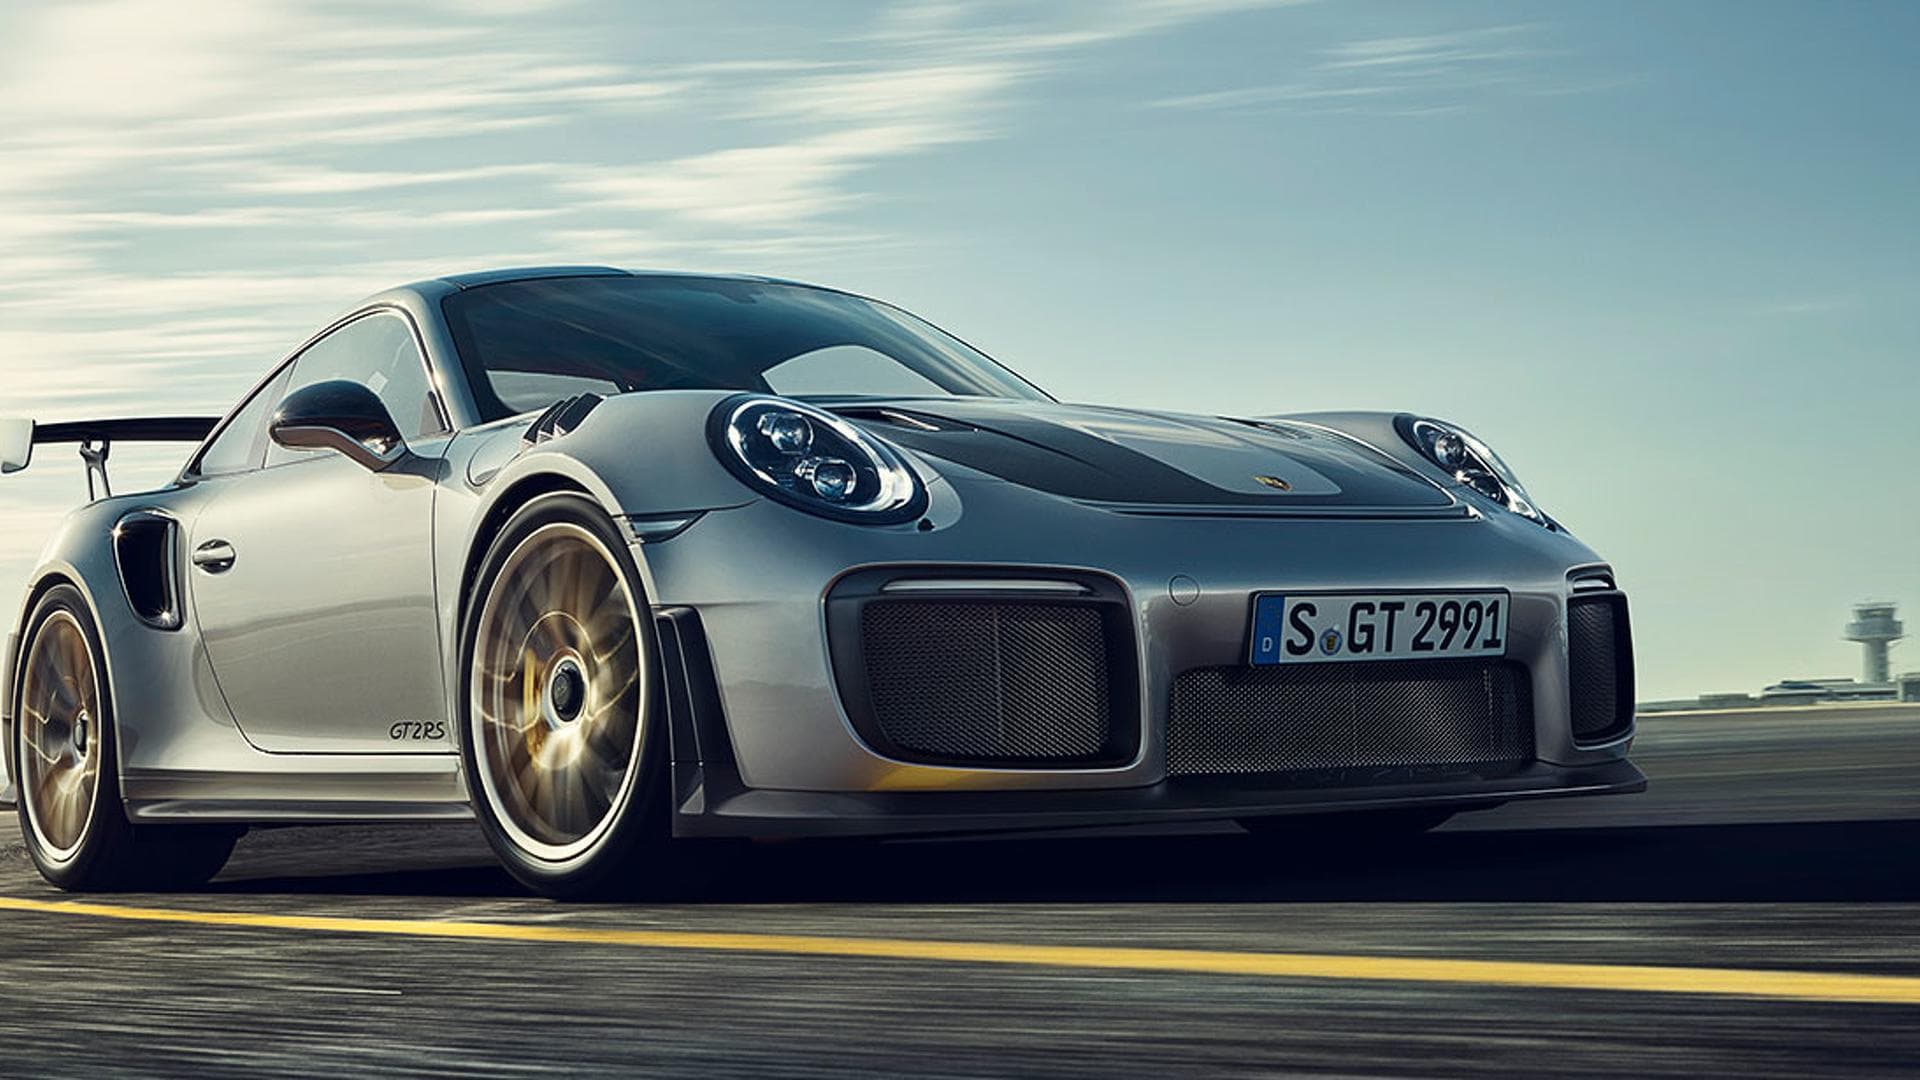 Rumor Claims 2018 Porsche 911 GT2 RS Lapped the Nurburgring in 6:49